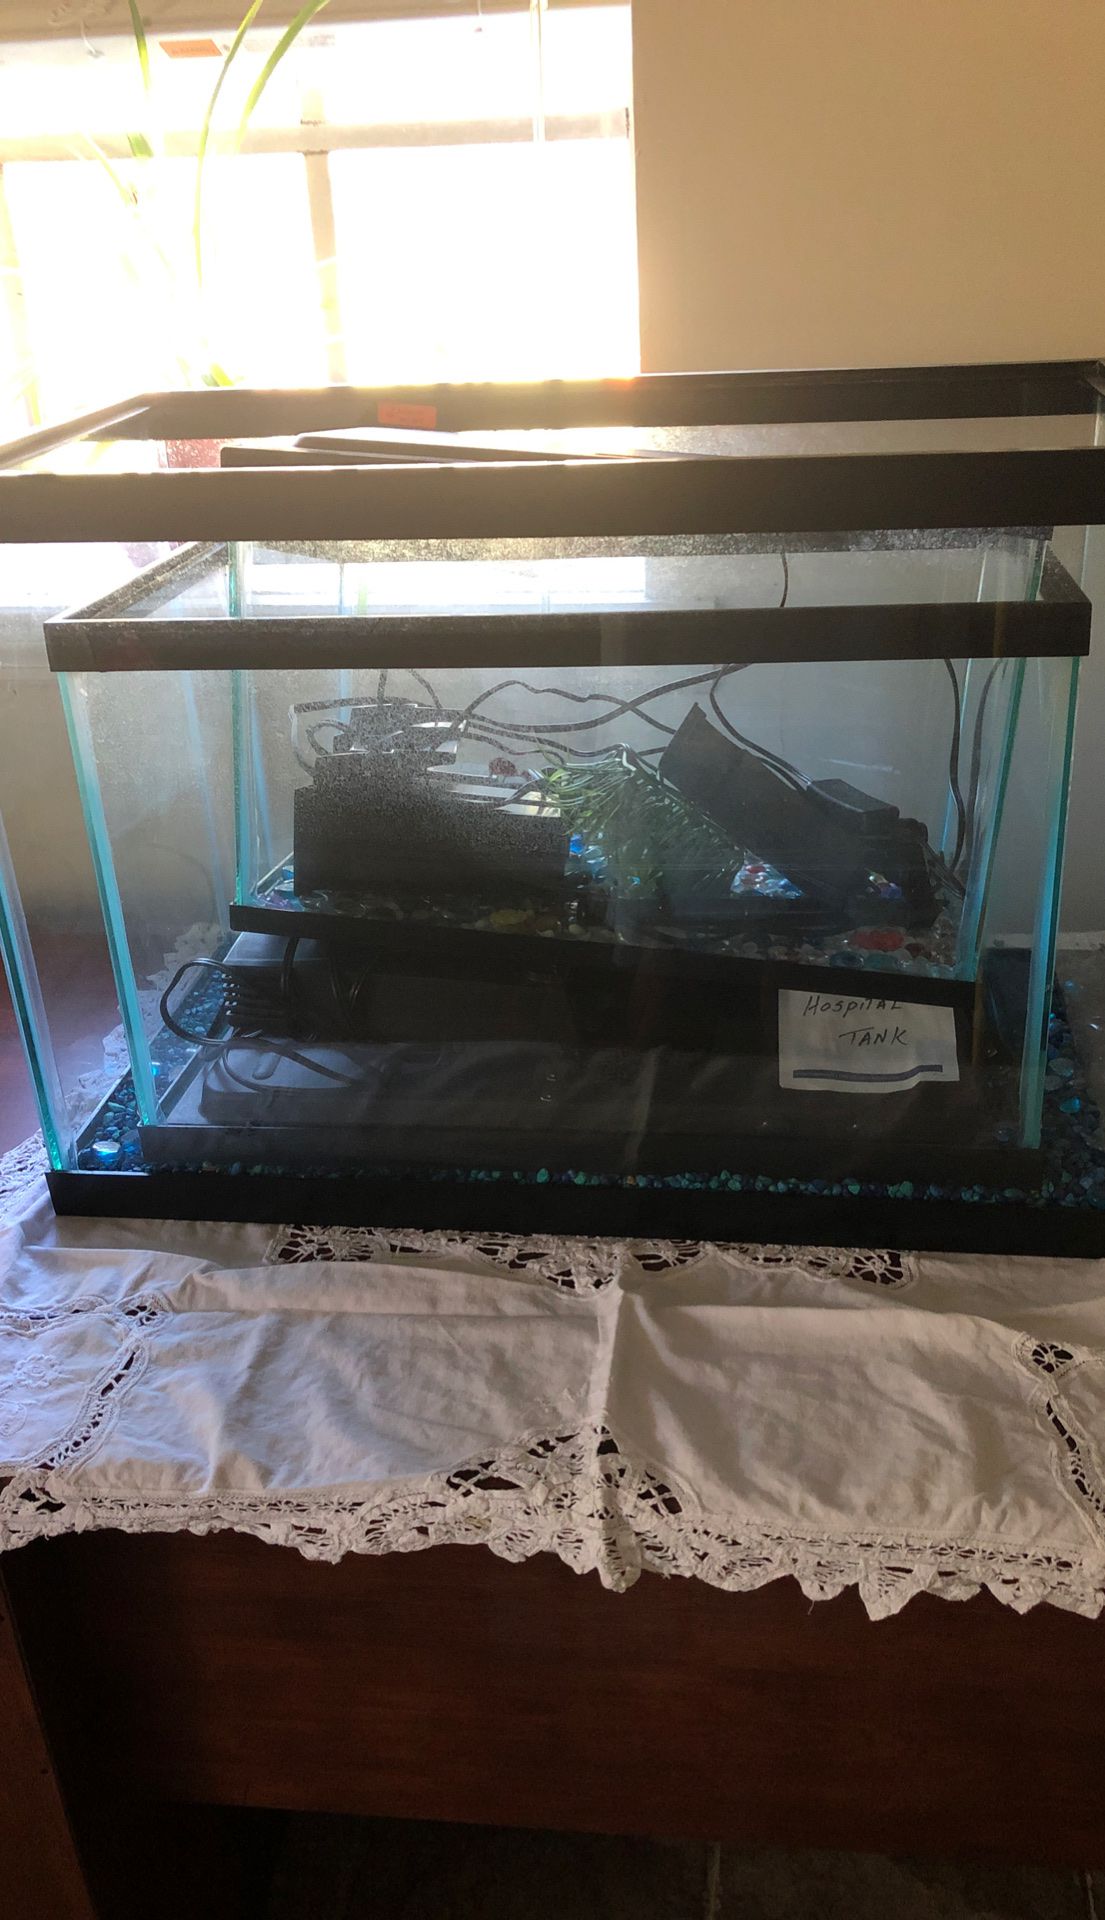 20, 10 and 5 gal fish tank and filter for 2 or them. $75 for all or will sale separate.